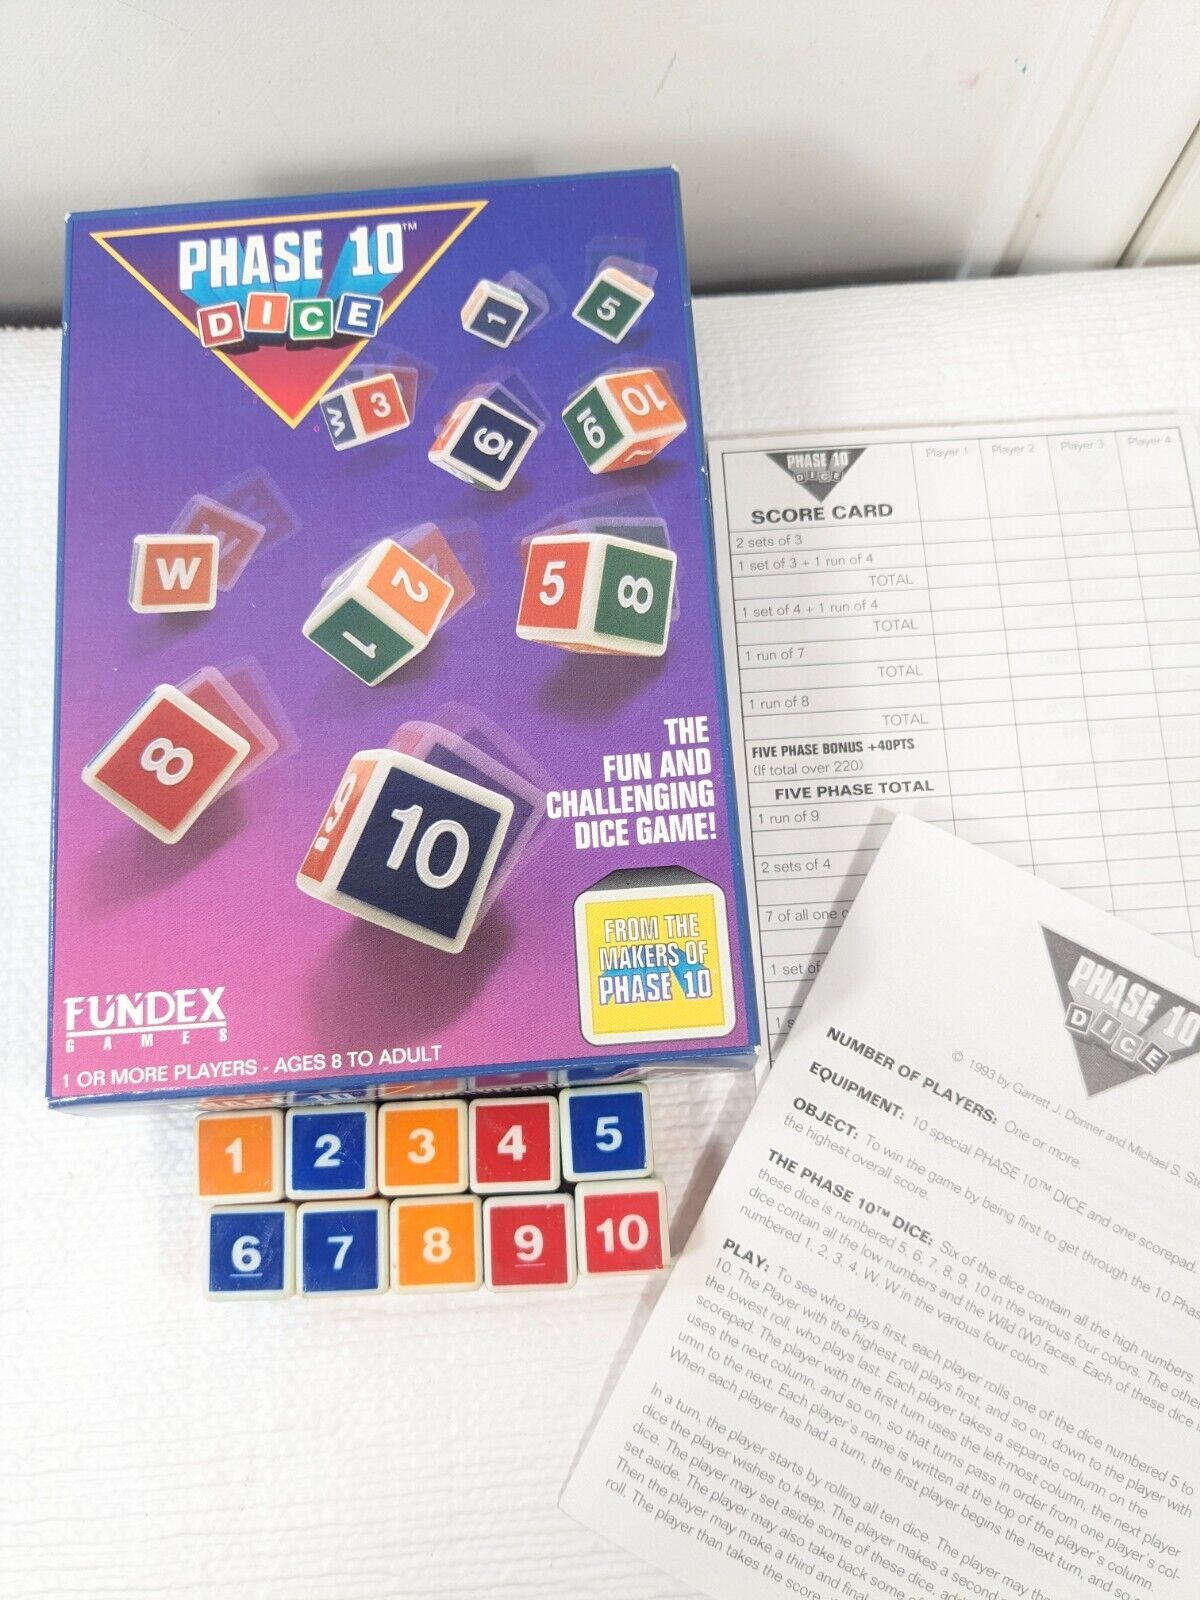 Primary image for Phase 10 Dice Game Blue Box Fundex Complete Score Pad Instructions #2720 Vintage